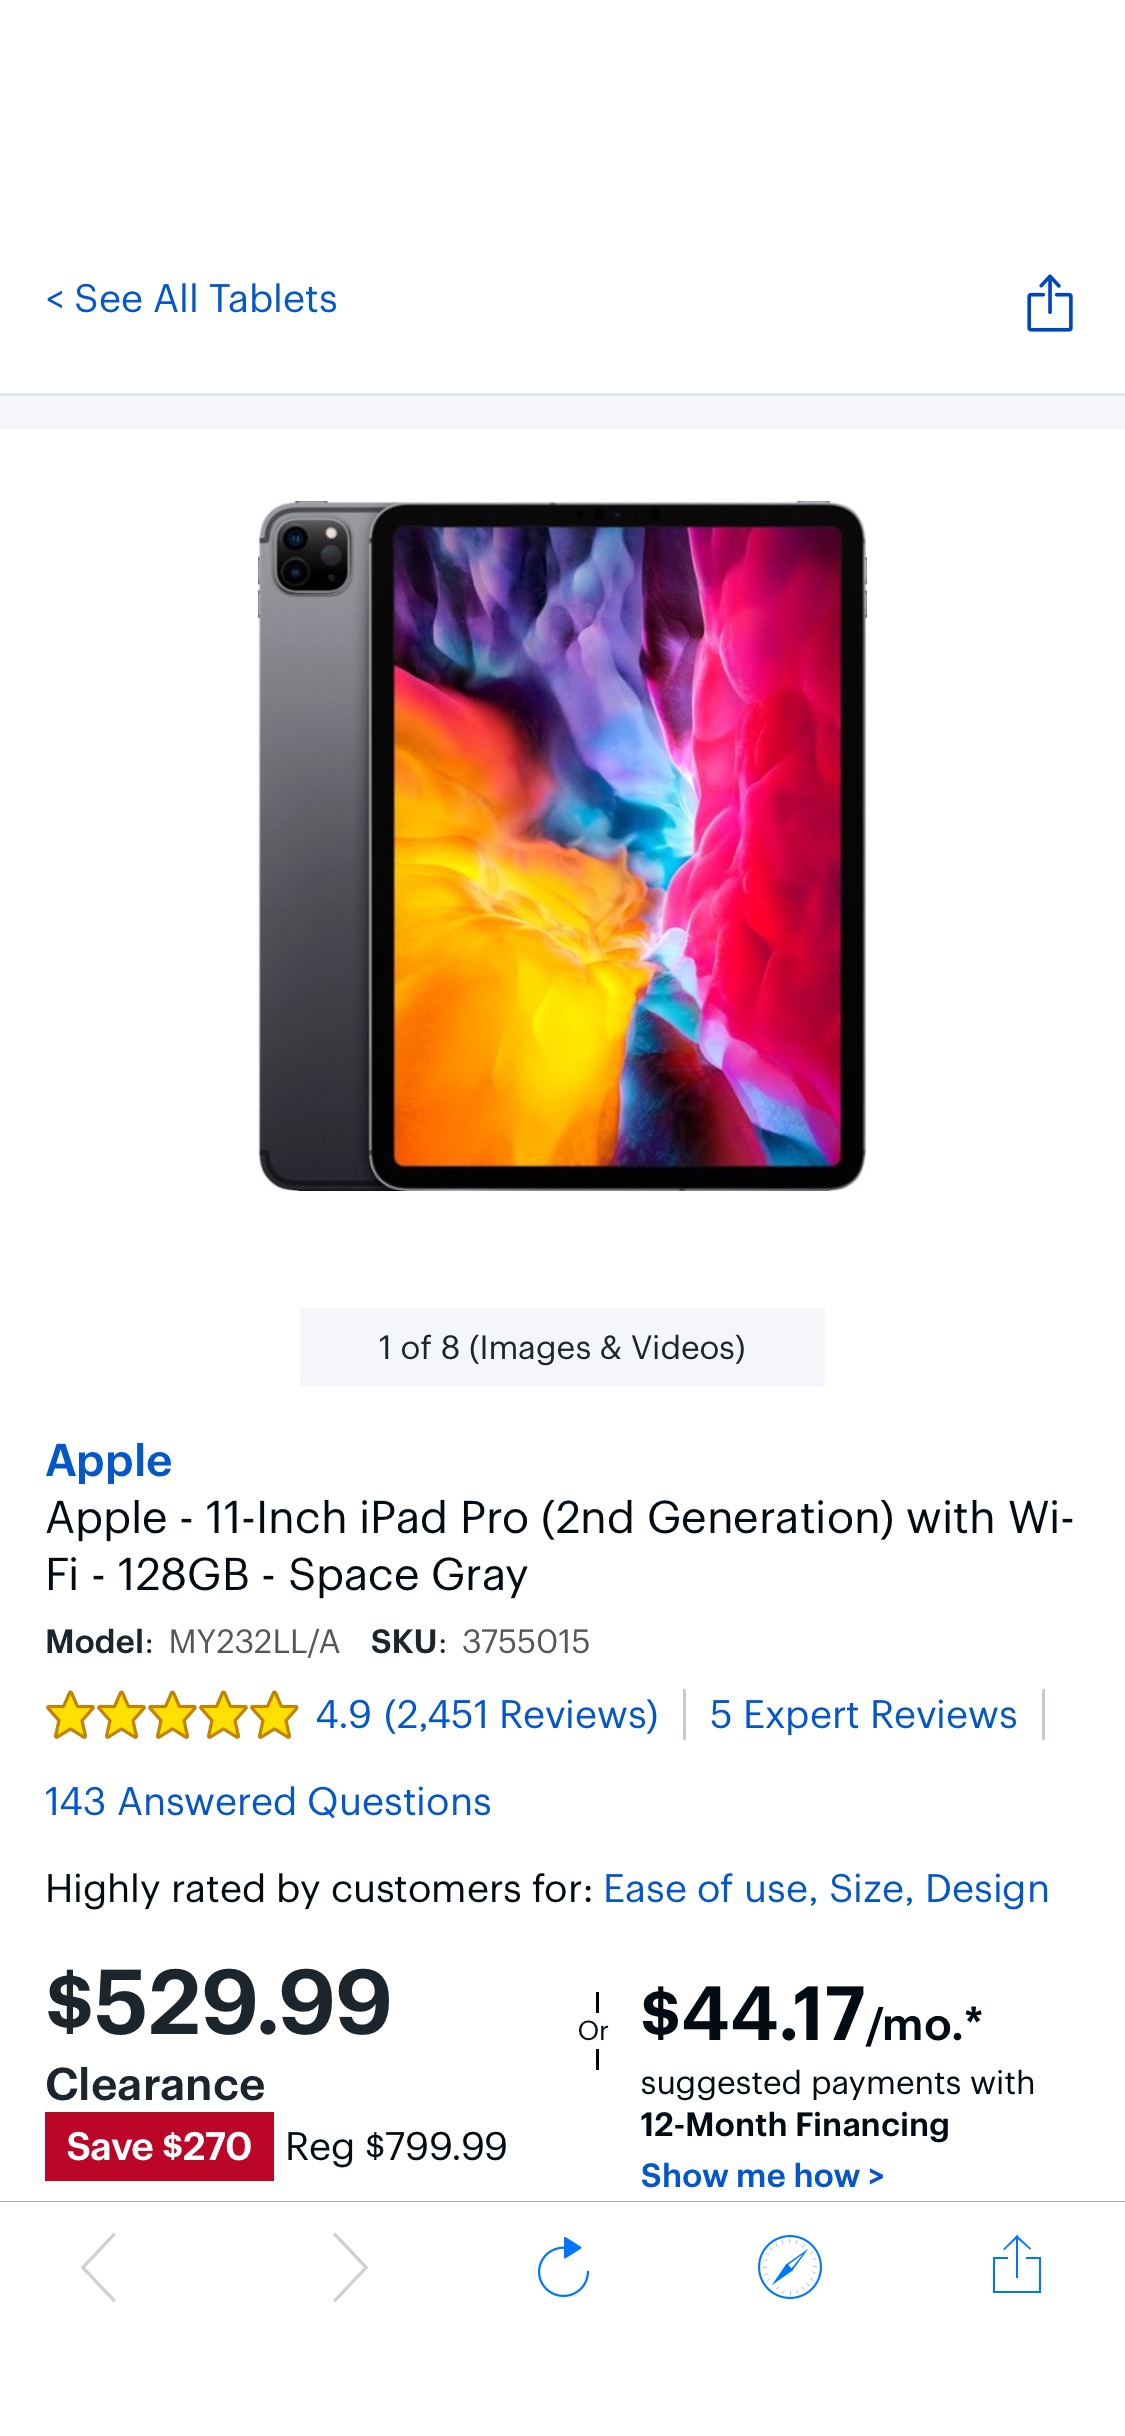 Apple 11-Inch iPad Pro (2nd Generation) with Wi-Fi 128GB Space Gray MY232LL/A - Best Buy平板